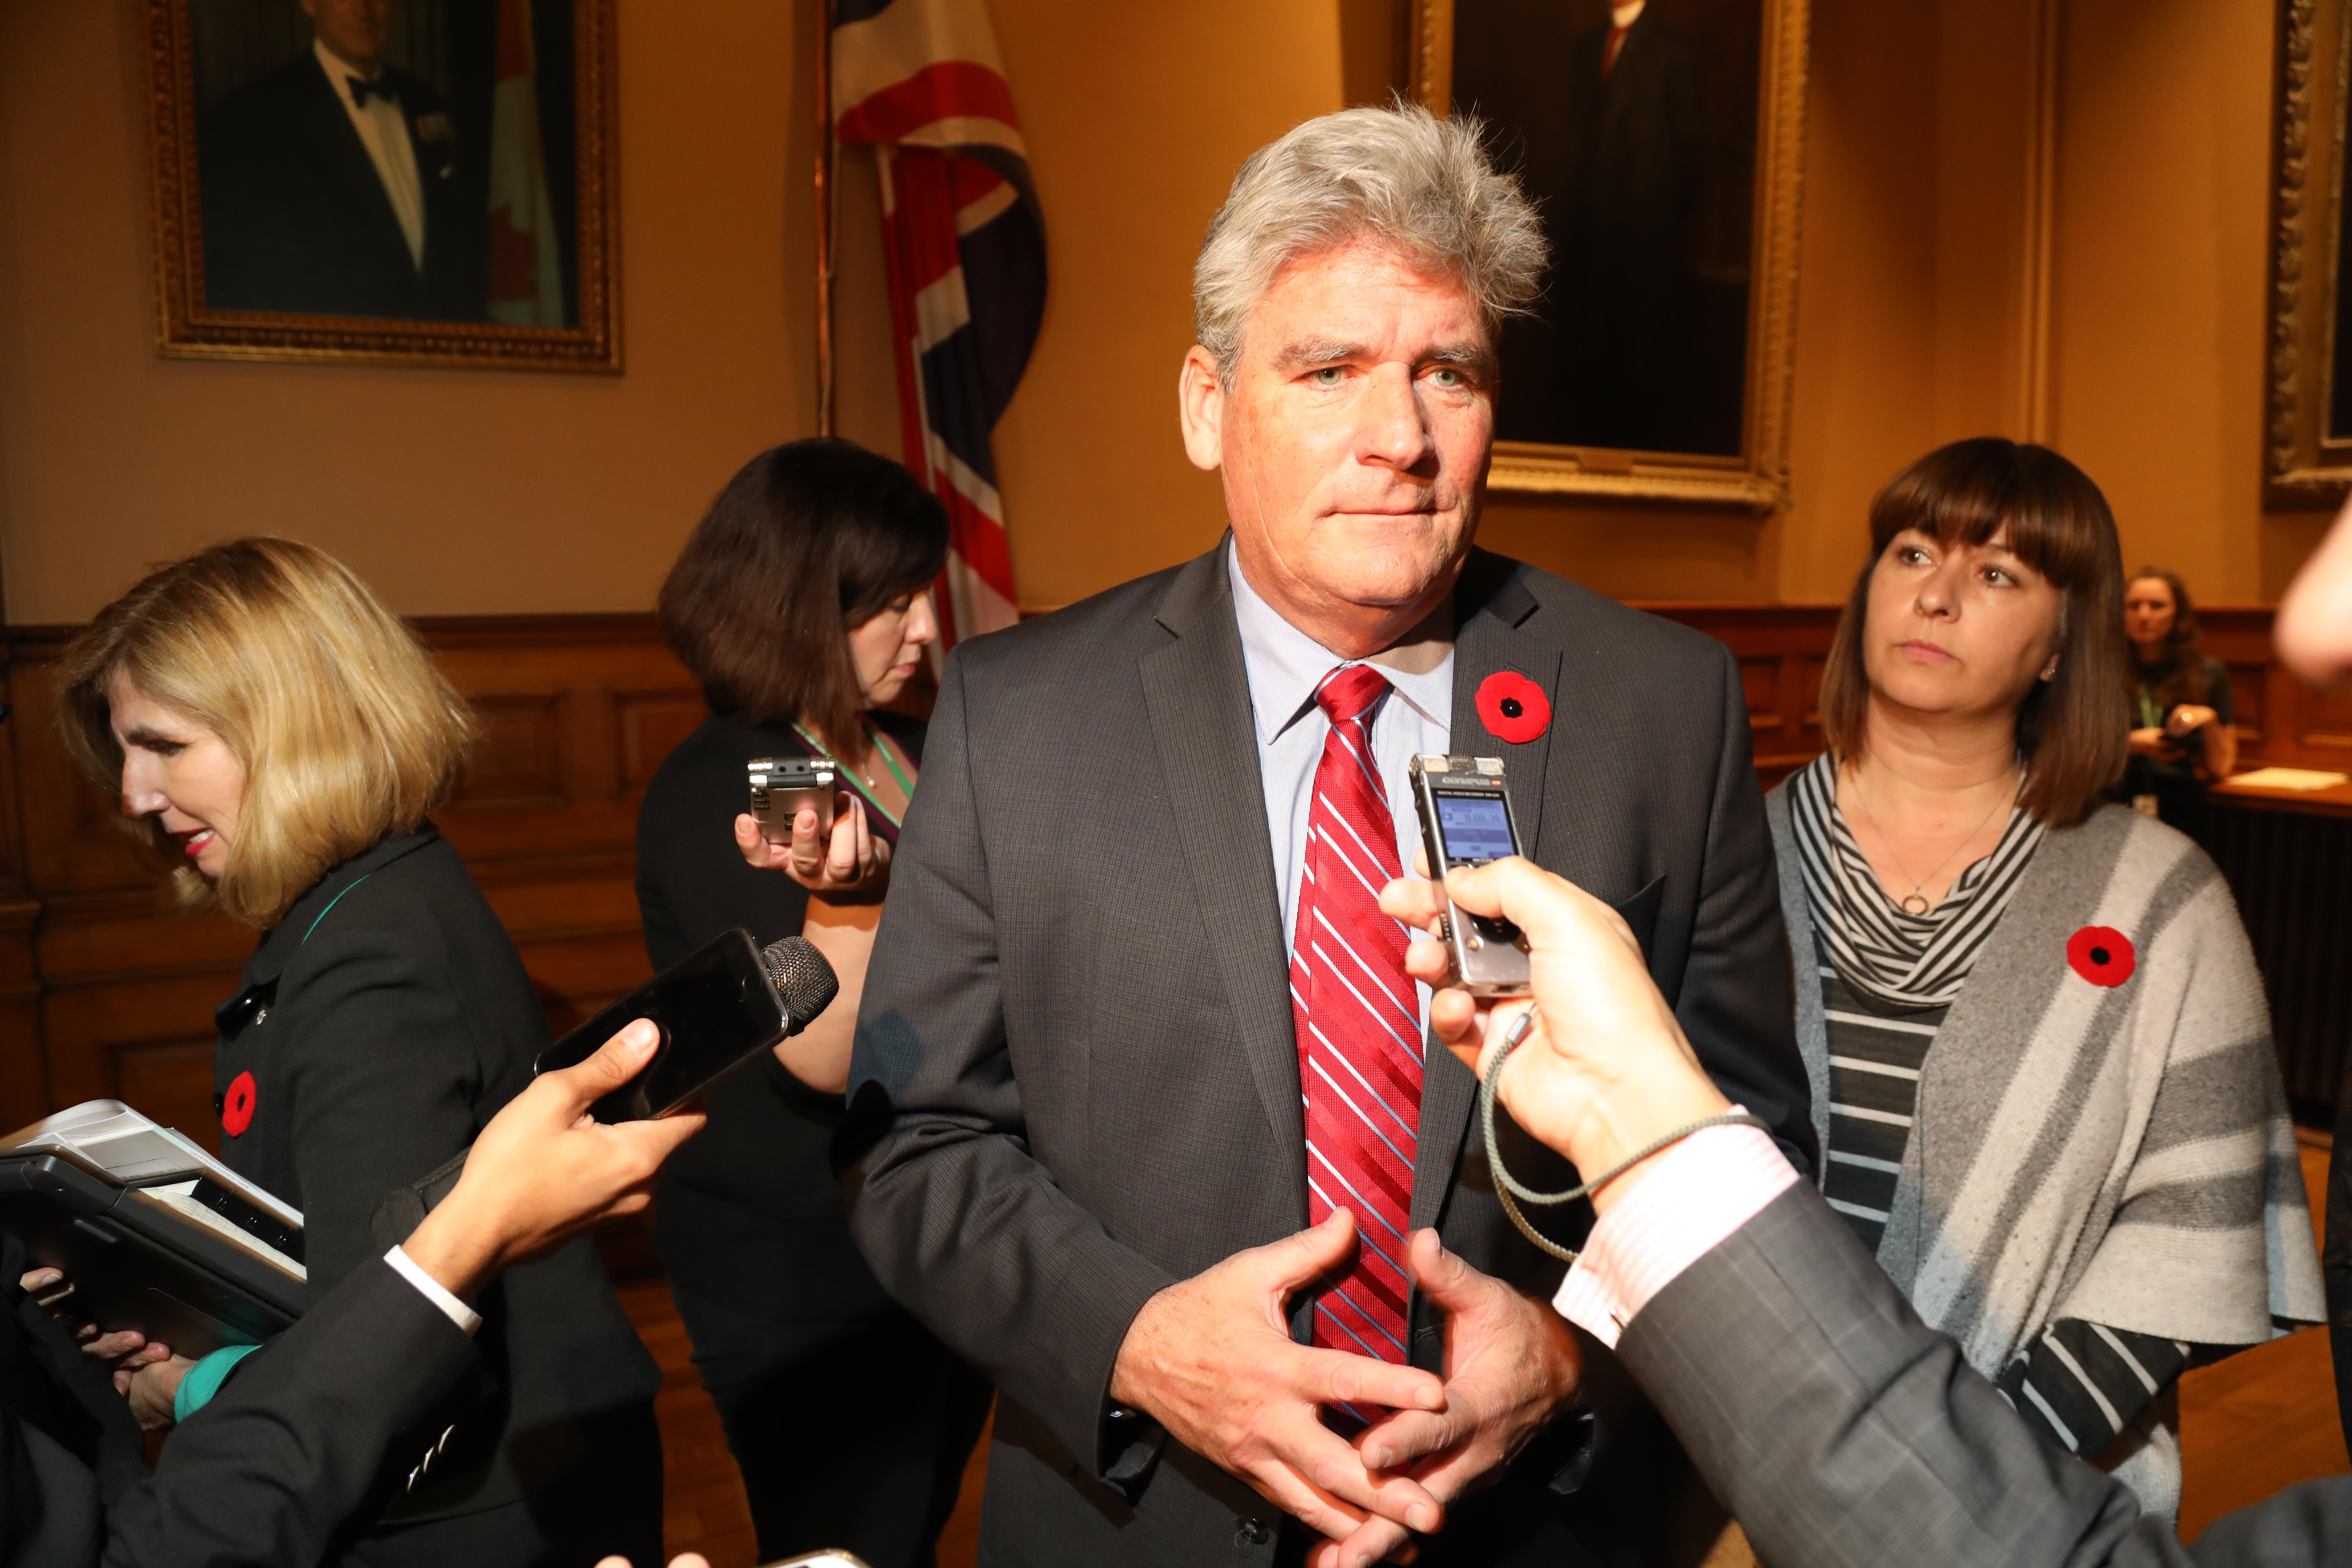 John Fraser discusses lessons learned and which TV character he feels like at Queen's Park